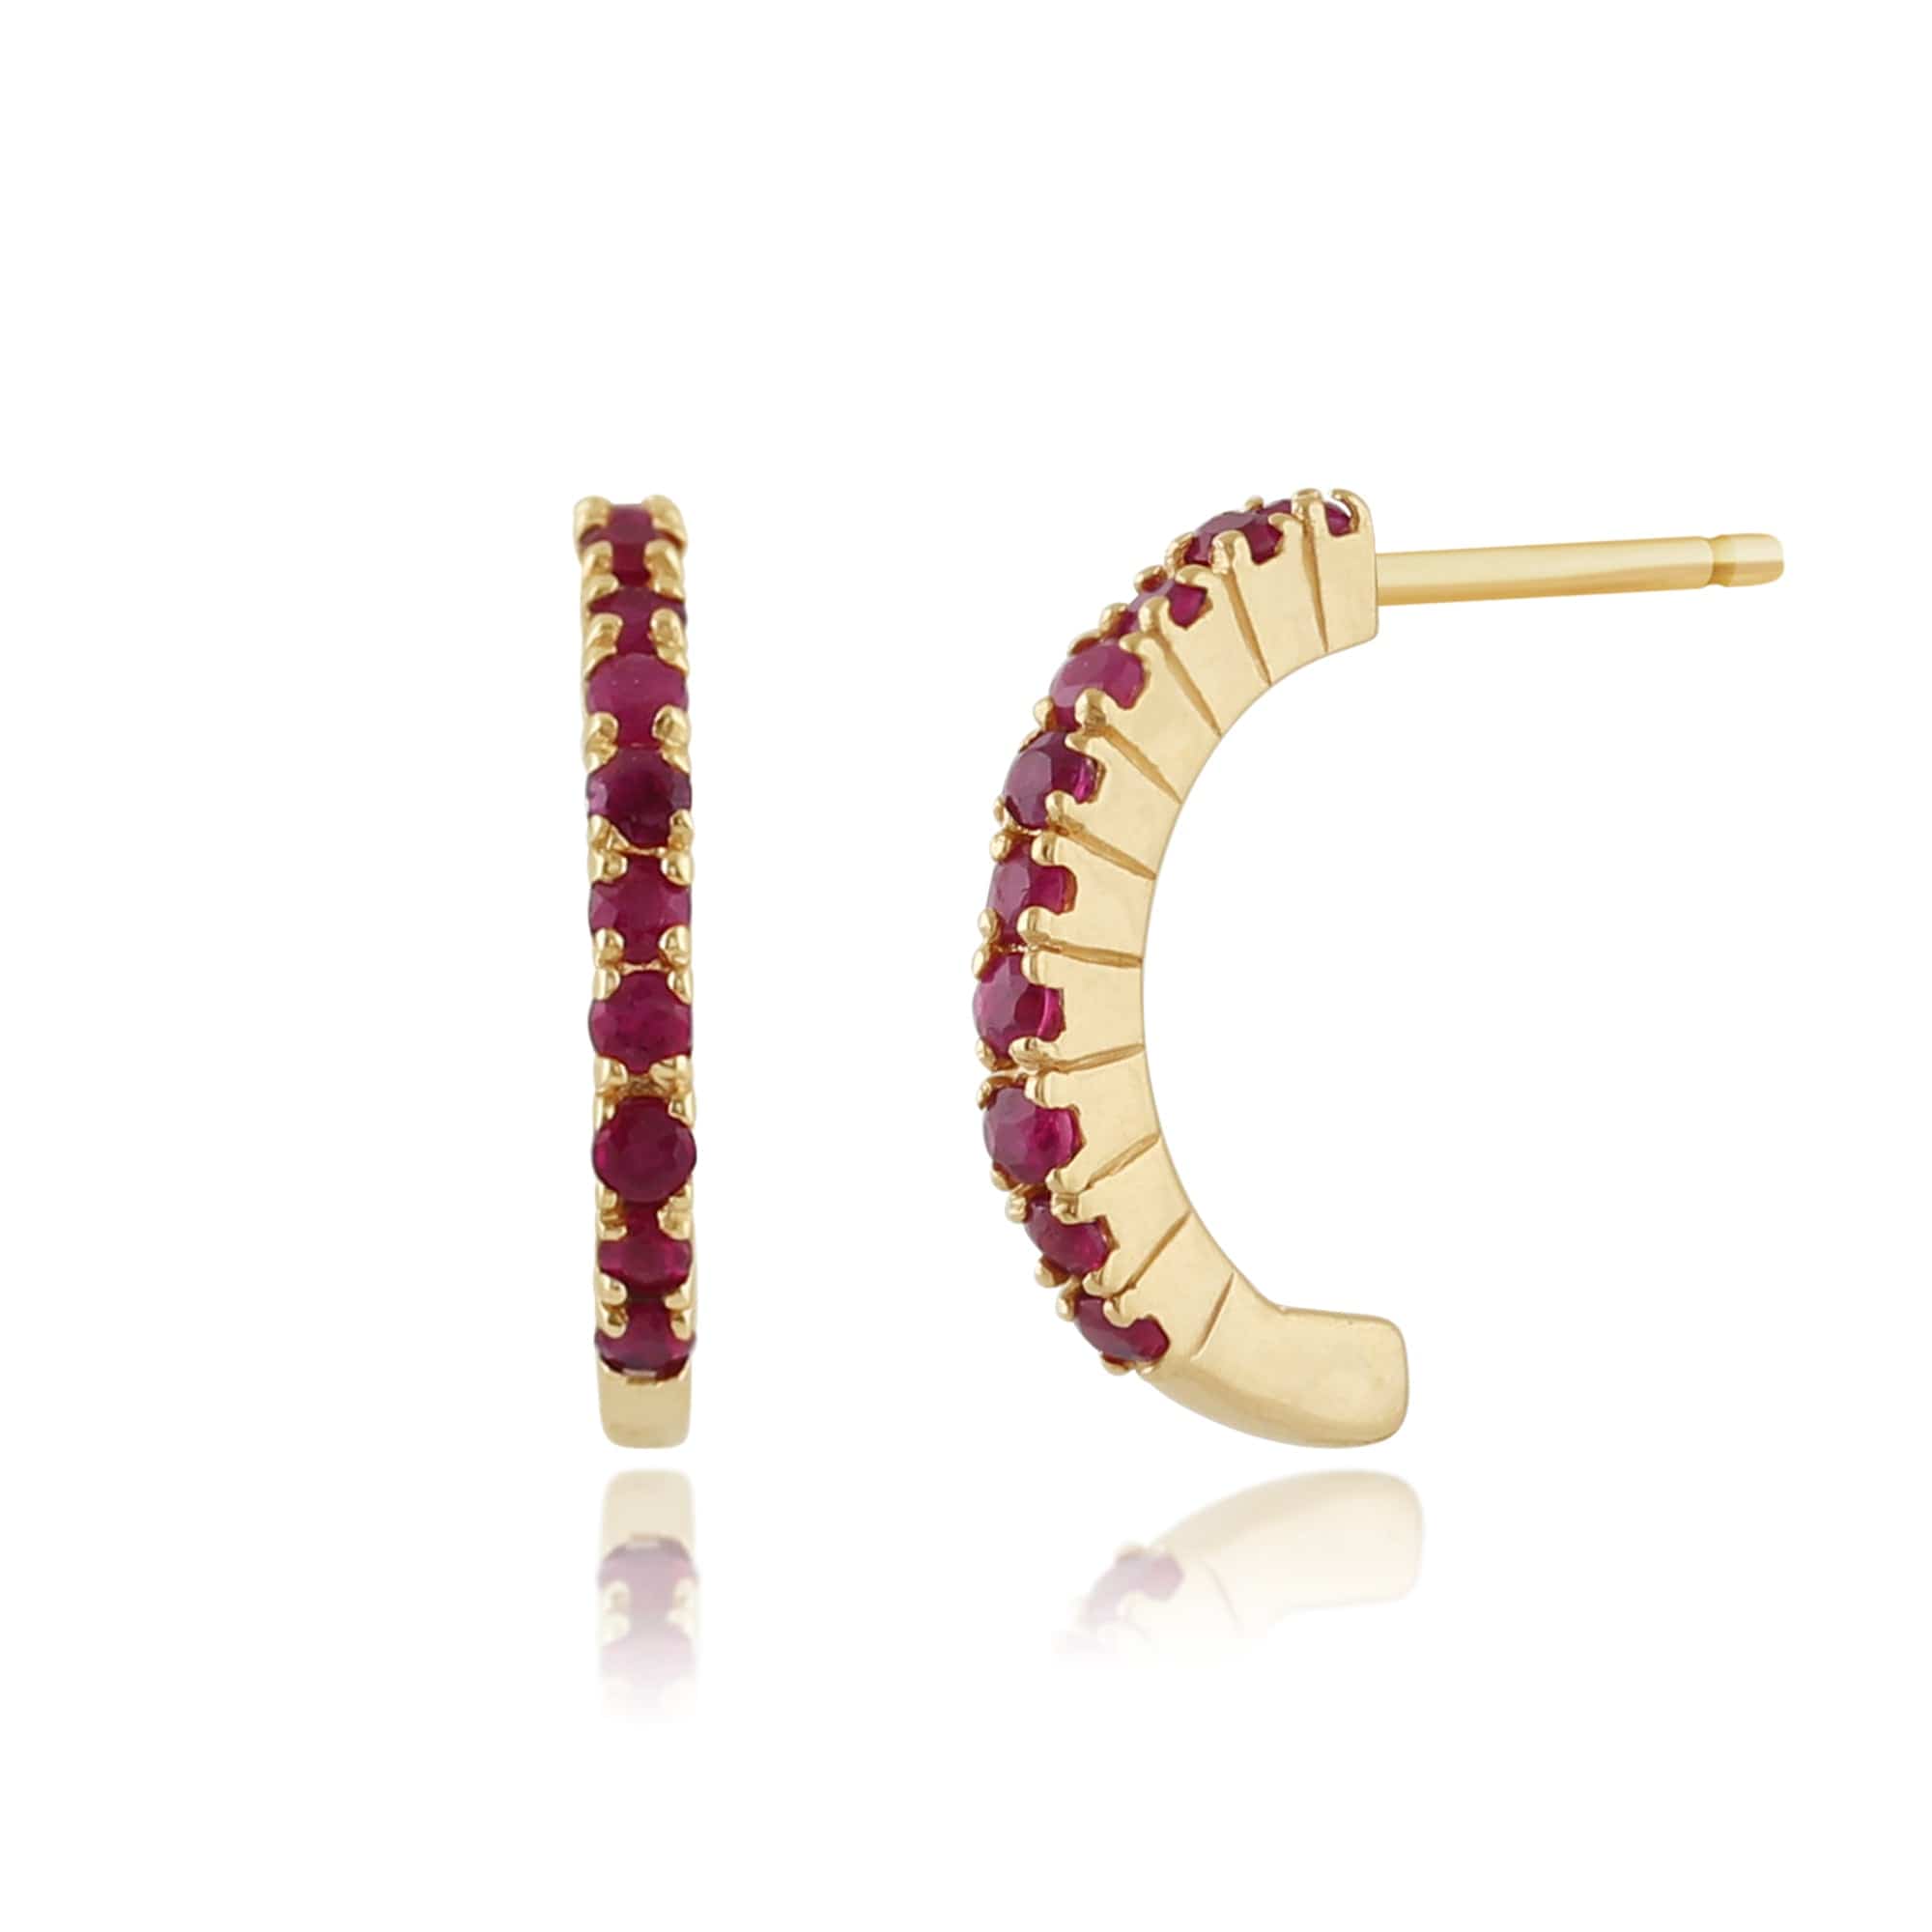 Classic Round Ruby Half Hoop Style Earrings in 9ct Yellow Gold - Gemondo